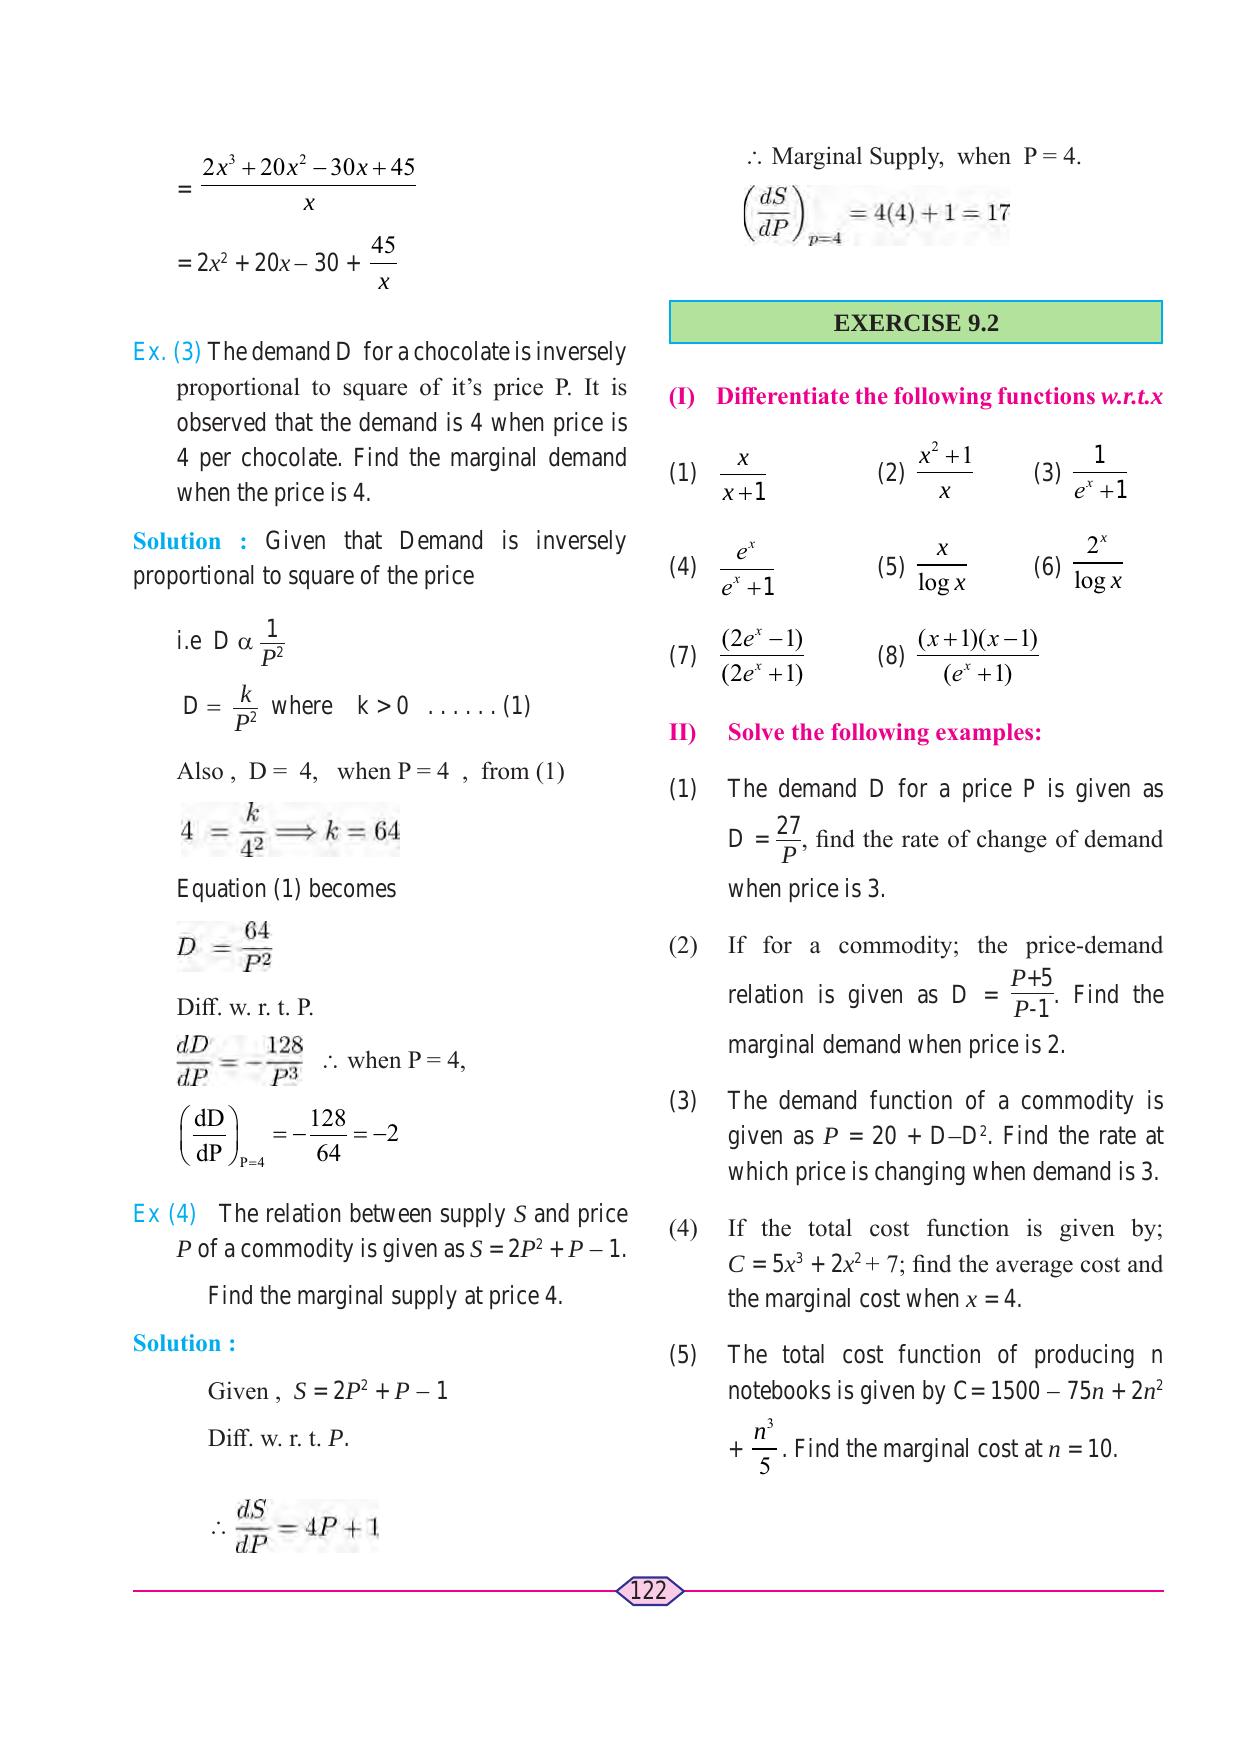 Maharashtra Board Class 11 Maths (Commerce) (Part 1) Textbook - Page 132